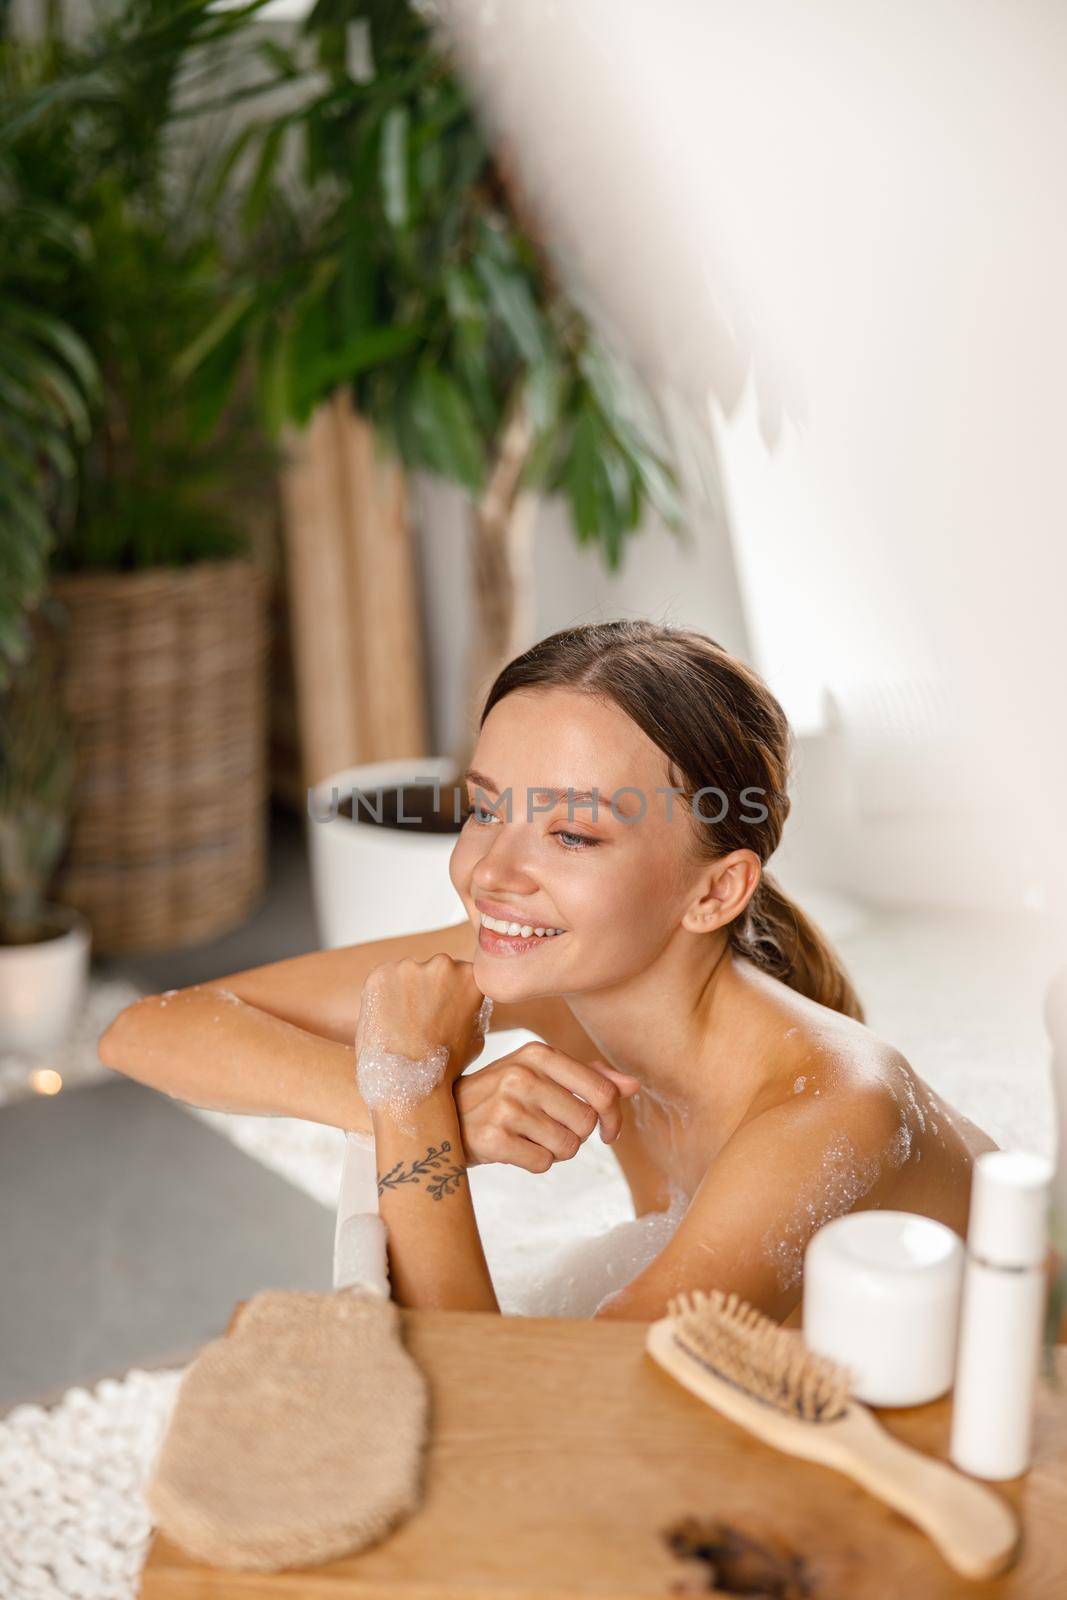 Joyful young woman smiling away and leaning on bathtub side while bathing at spa resort. Wellness, beauty and care concept